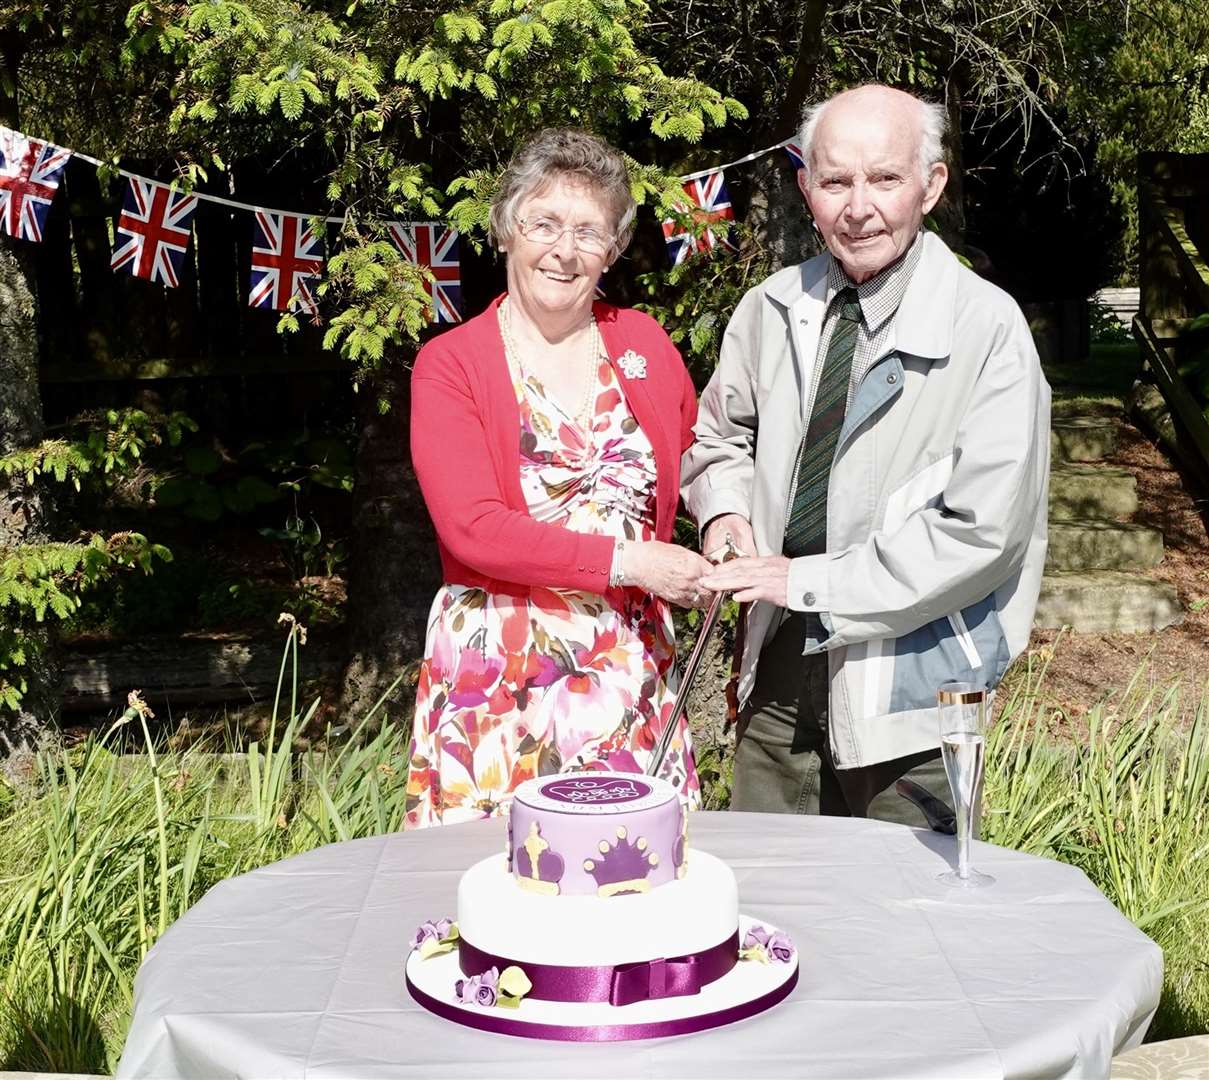 The cake was cut by Mary and Dodo Farquhar, who later this year will celebrate their diamond wedding anniversary.